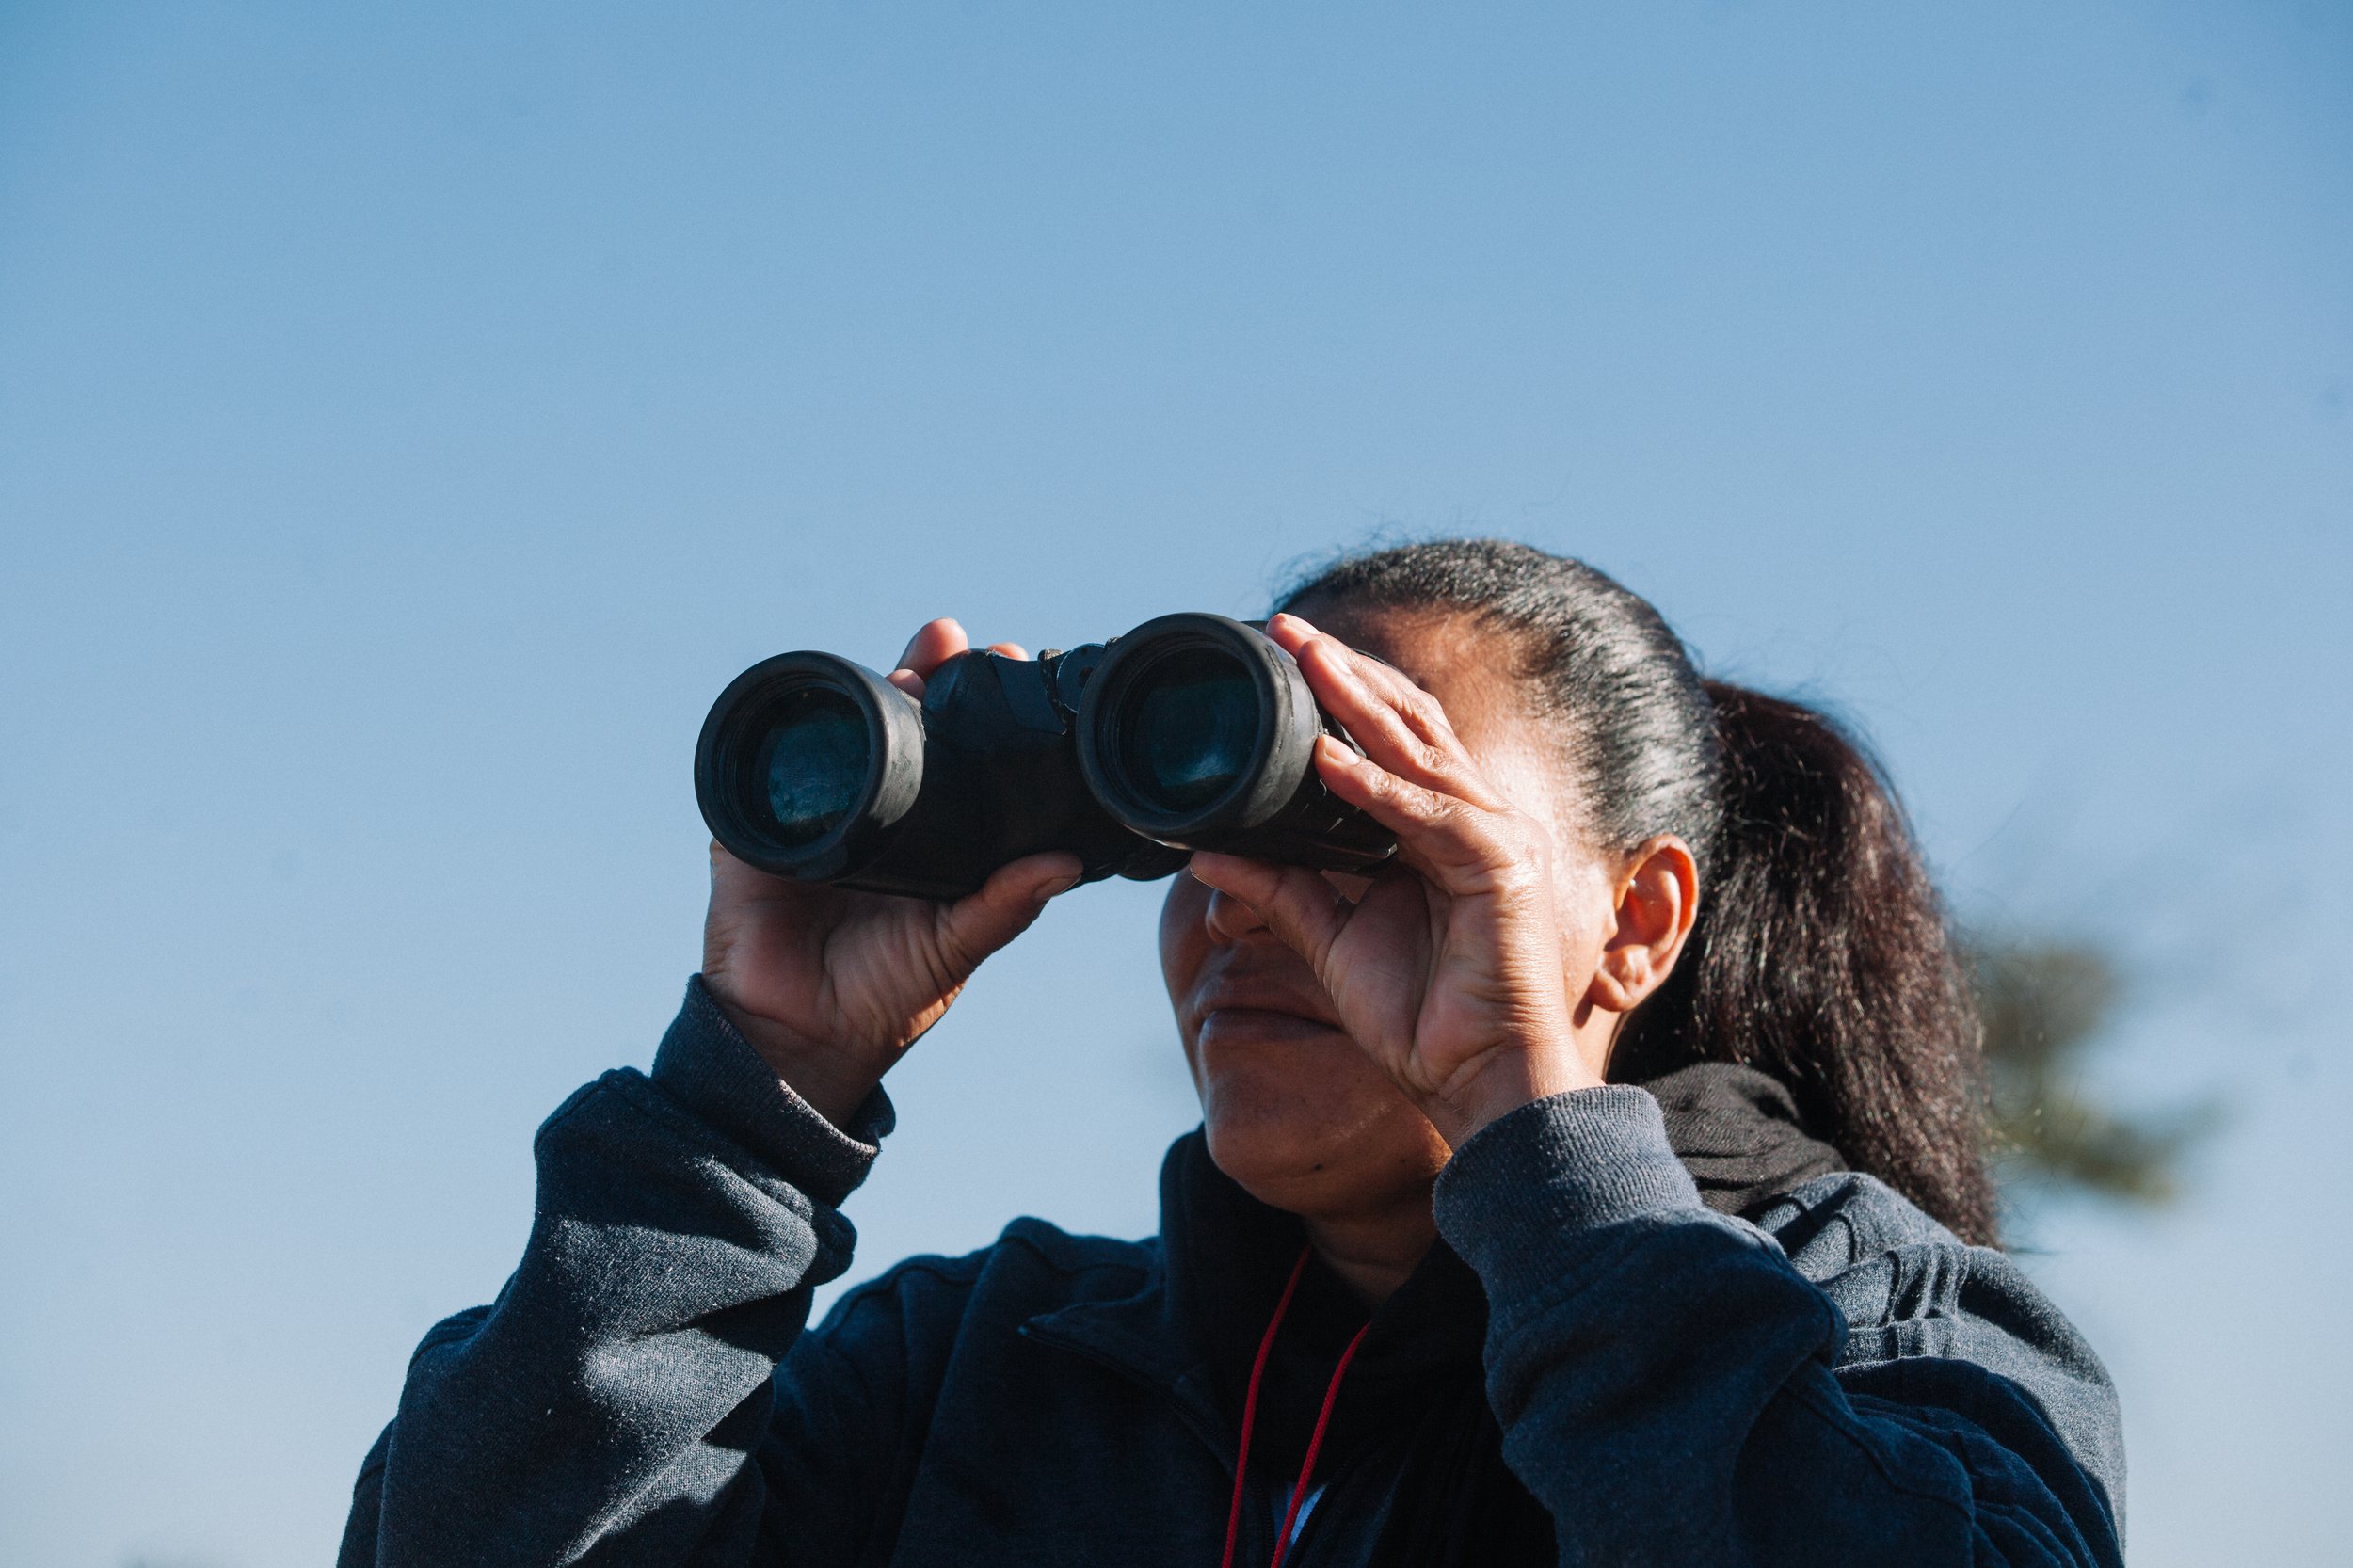  Nohemy Yamileth Alvarez gazes through binoculars, witnessing a group of migrants crossing into Arizona with a mix of emotions - hope and sadness. She wonders if her own missing son had taken a similar path, adding to her empathy for those striving t